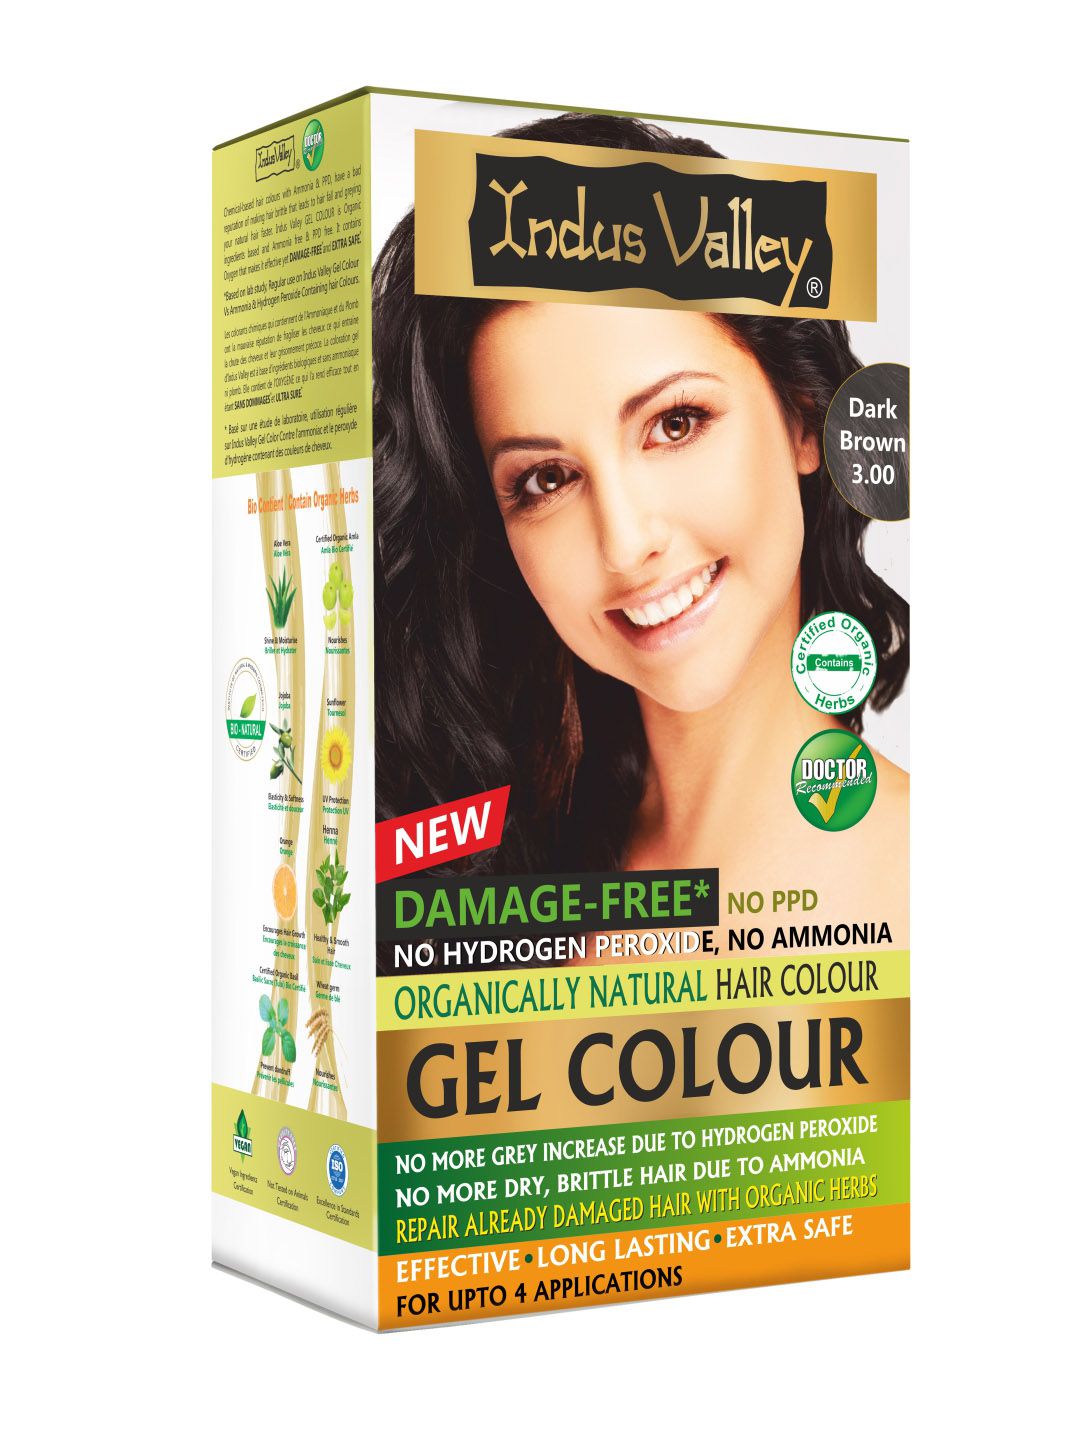 Indus Valley Organically Natural Gel Hair Color - Dark Brown 3.00 220g Price in India